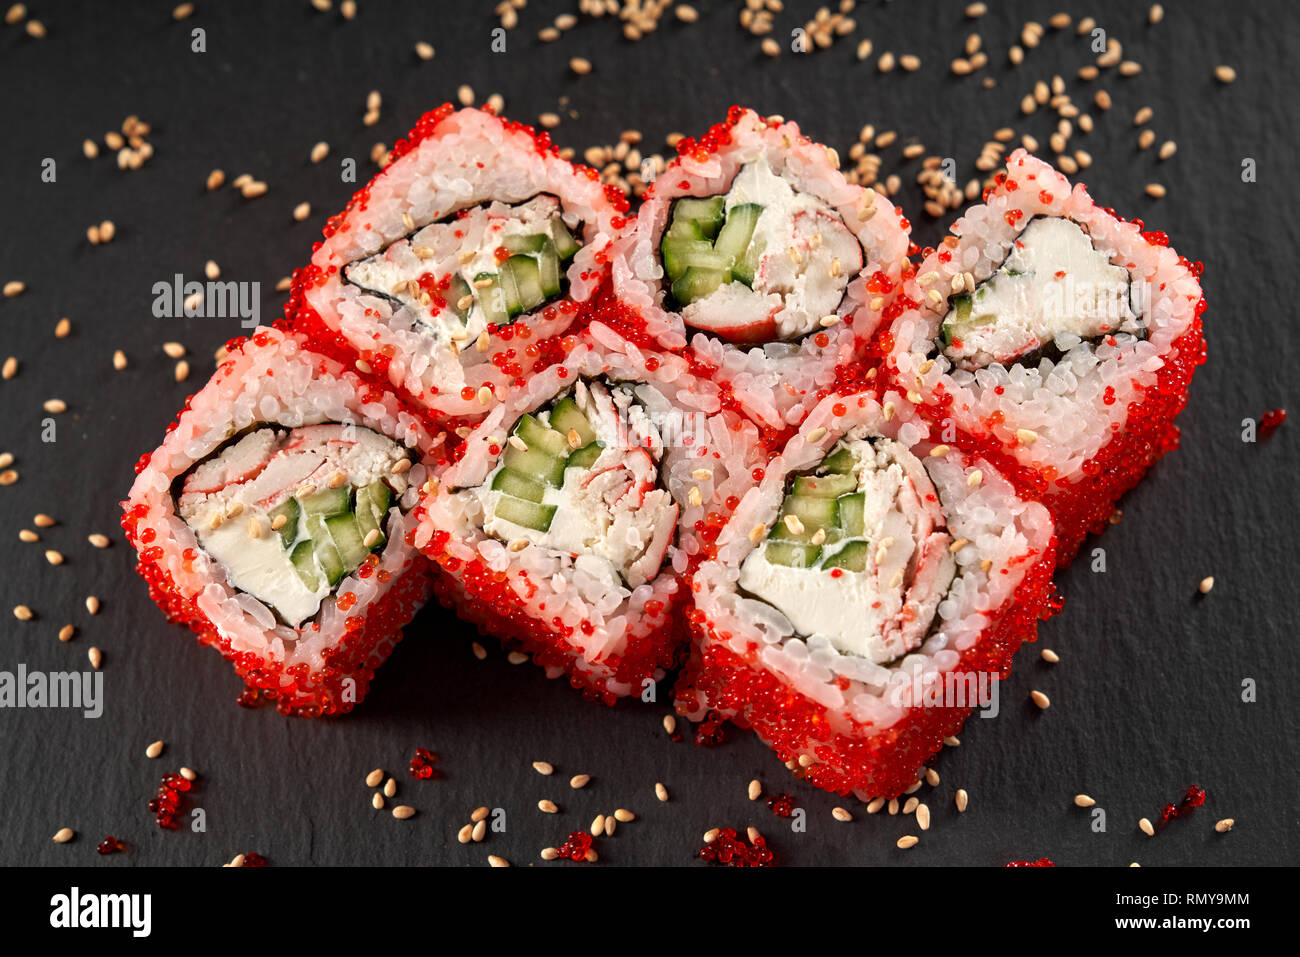 View from above of california roll with crab meat, cucumber and cream cheese. Sushi uramaki covered with red flying fish roe. Stock Photo